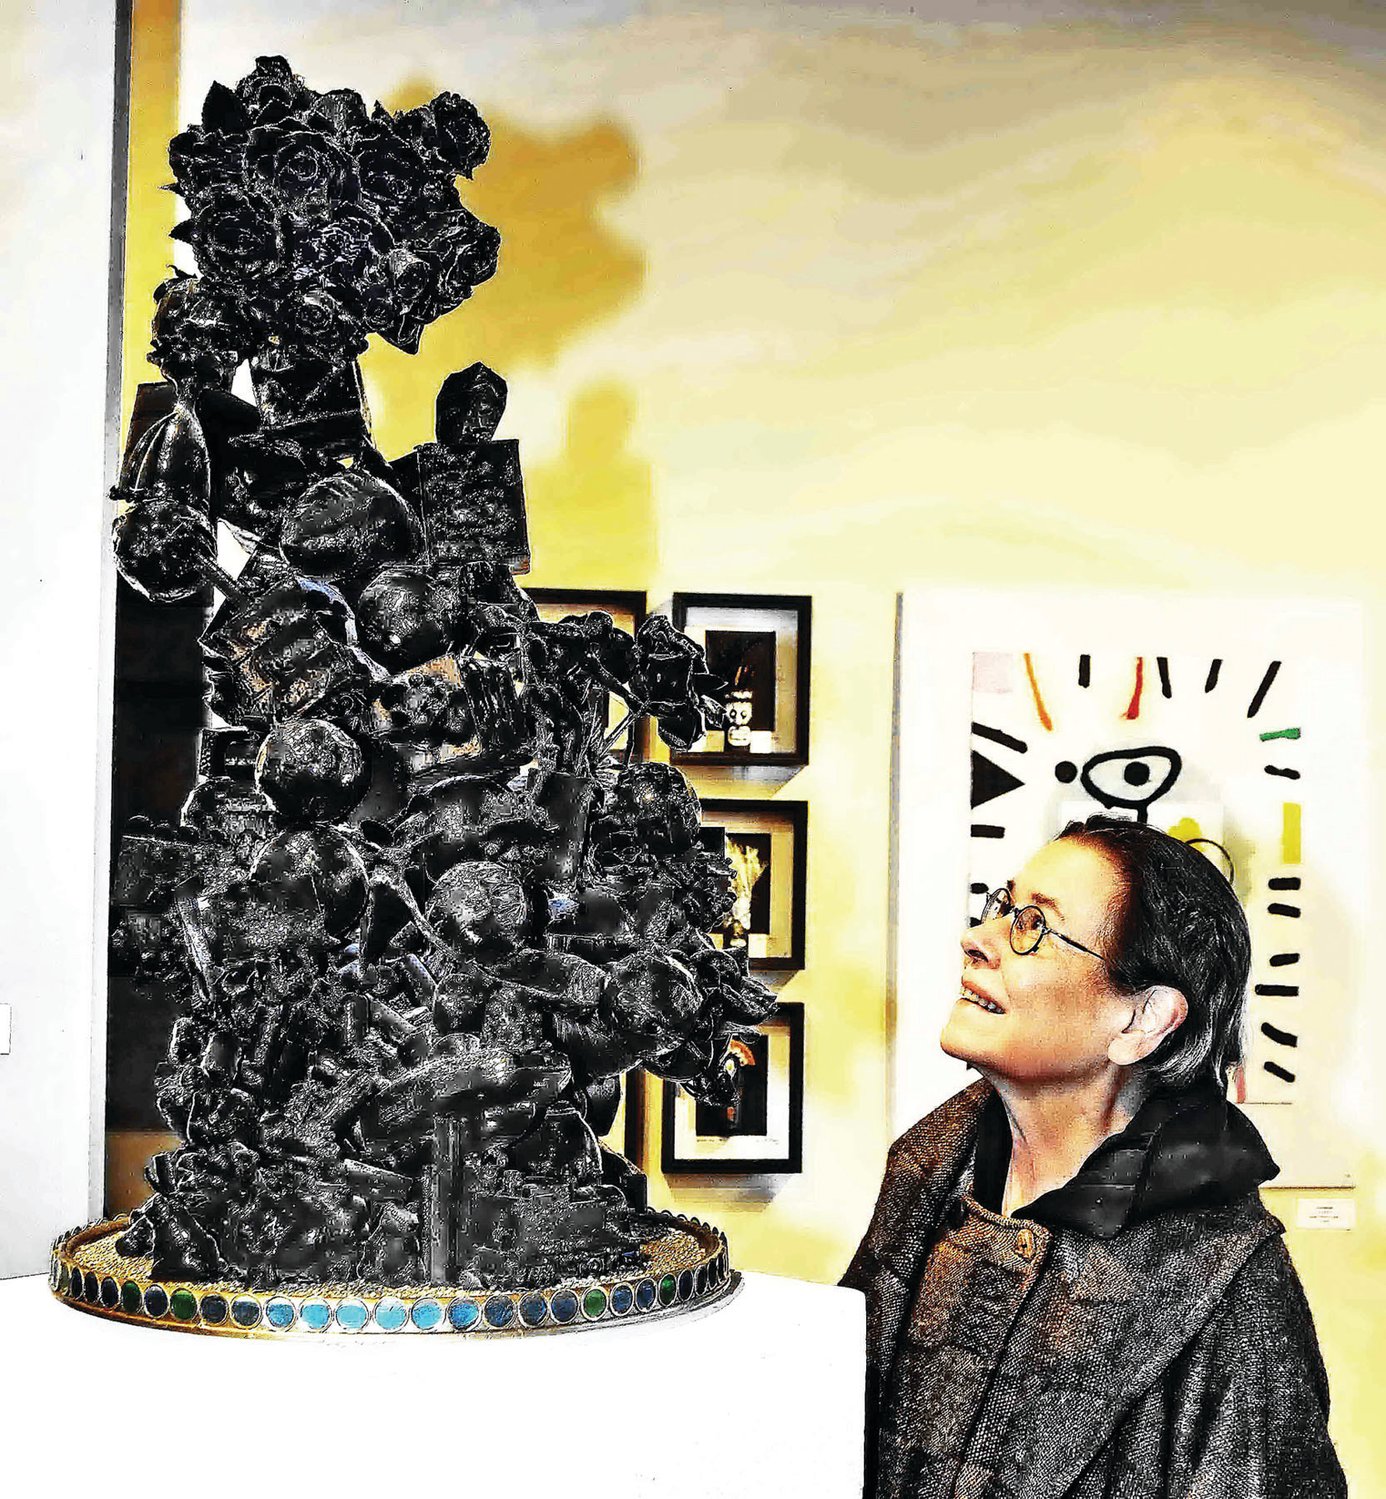 Anna Maria Ciccone with a sculpture by Guy Ciarcia, titled “Black,” in mixed media.